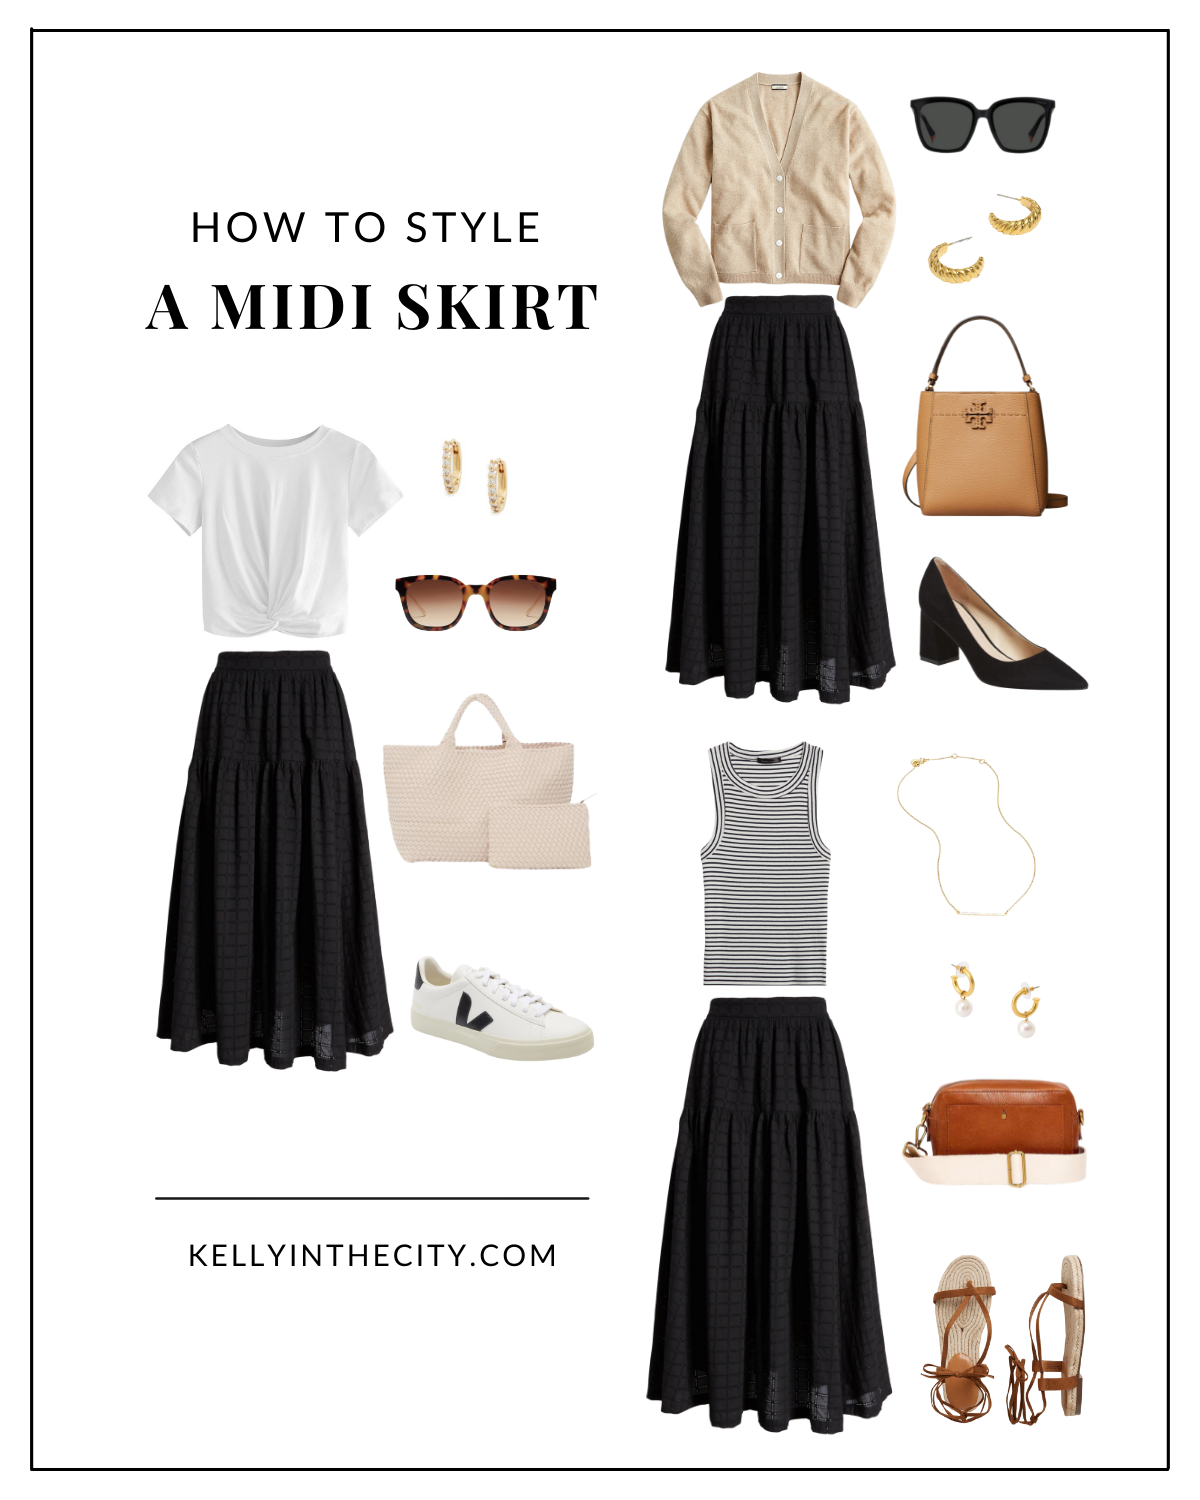 How to Style a Midi Skirt